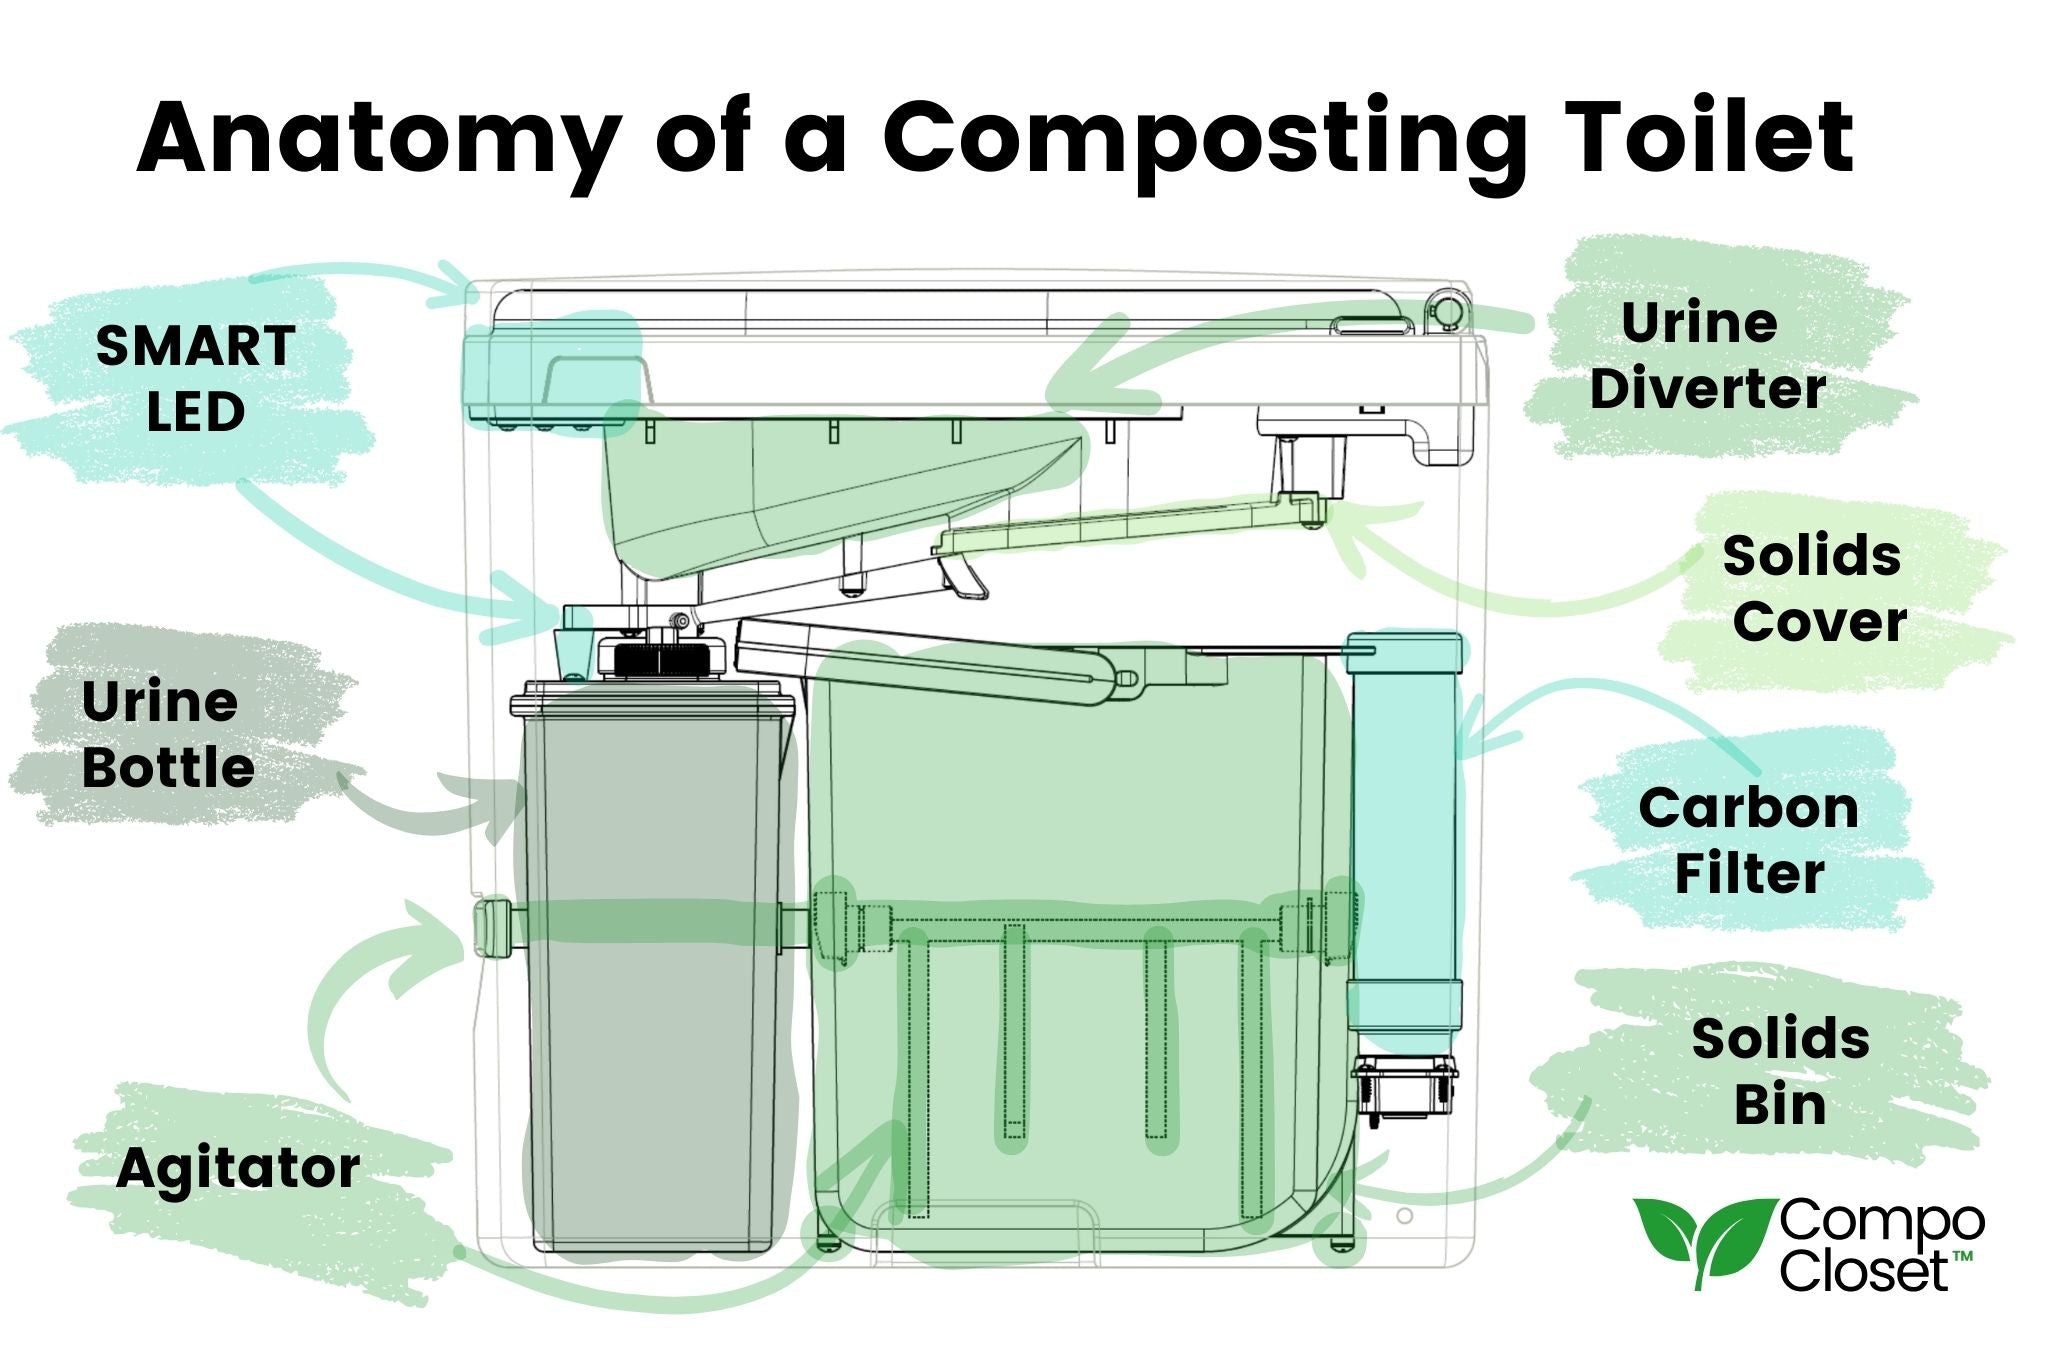 Anatomy of a Composting Toilet highlighting different components unlabelled